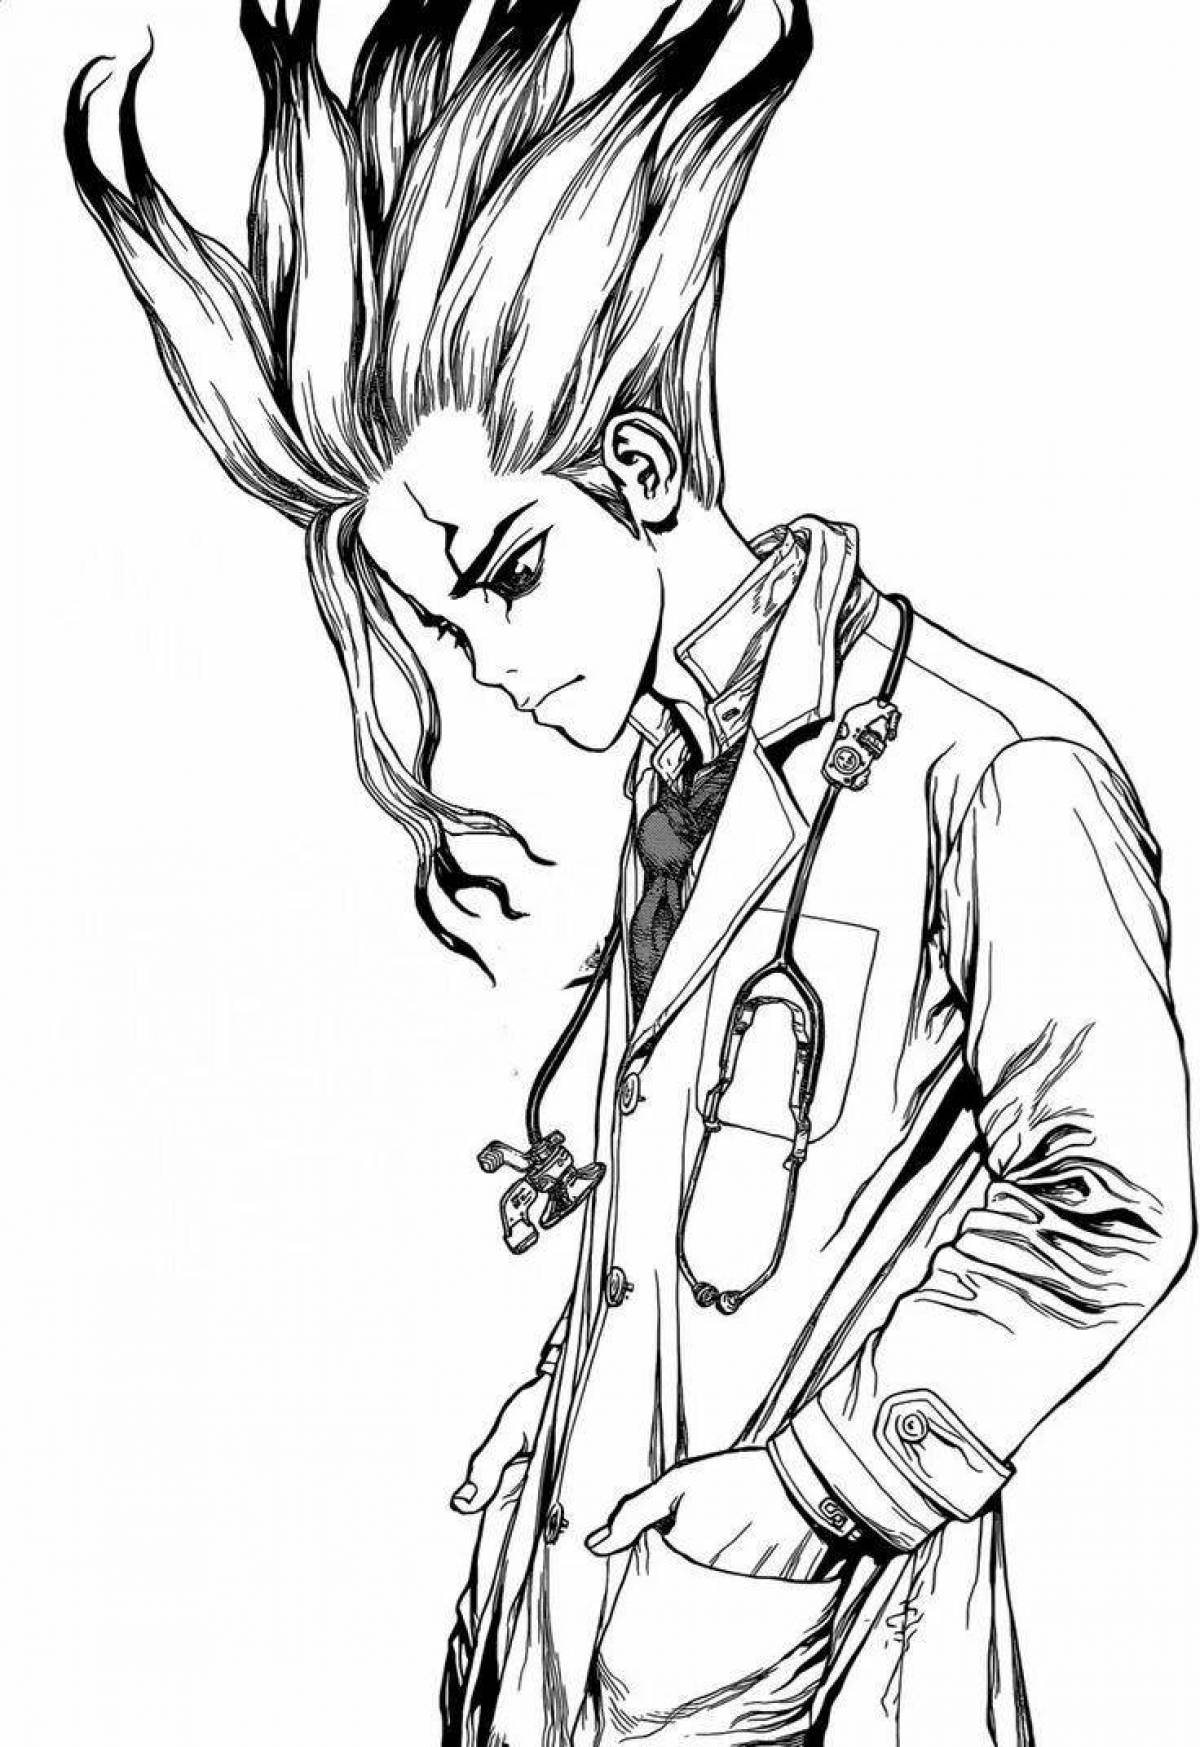 Dr. stone's amazing coloring page